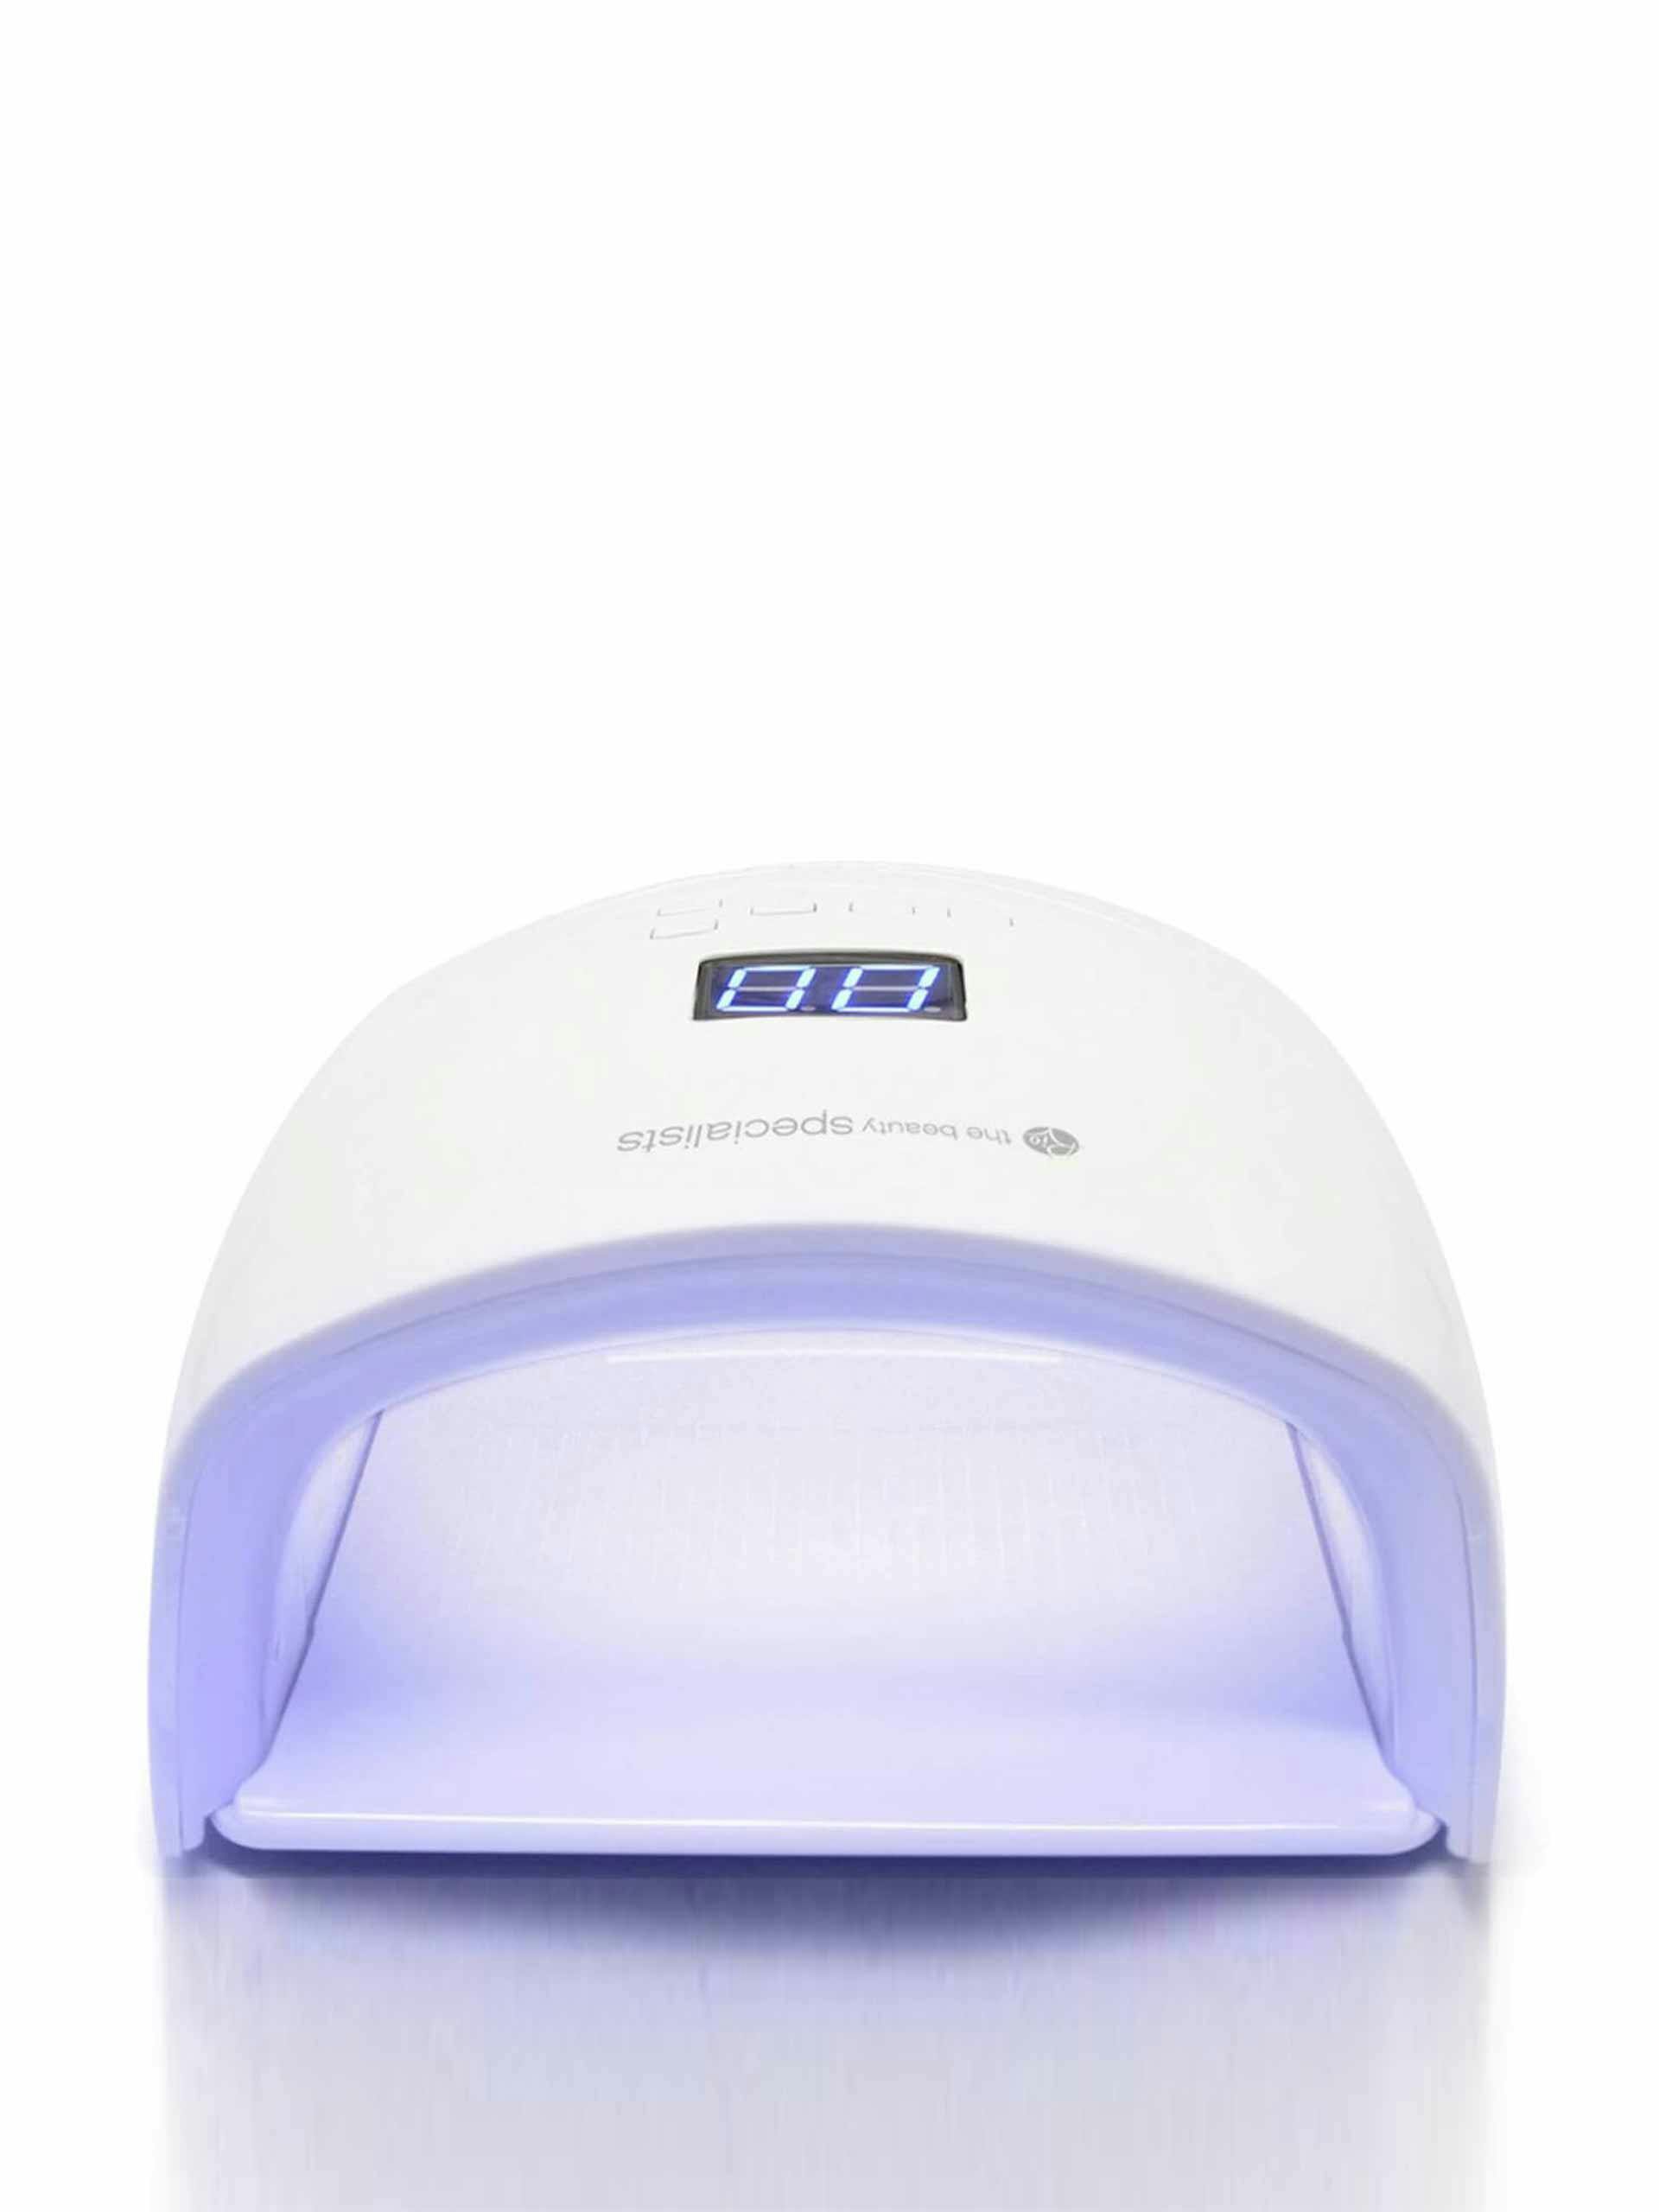 Rechargeable UV and LED lamp